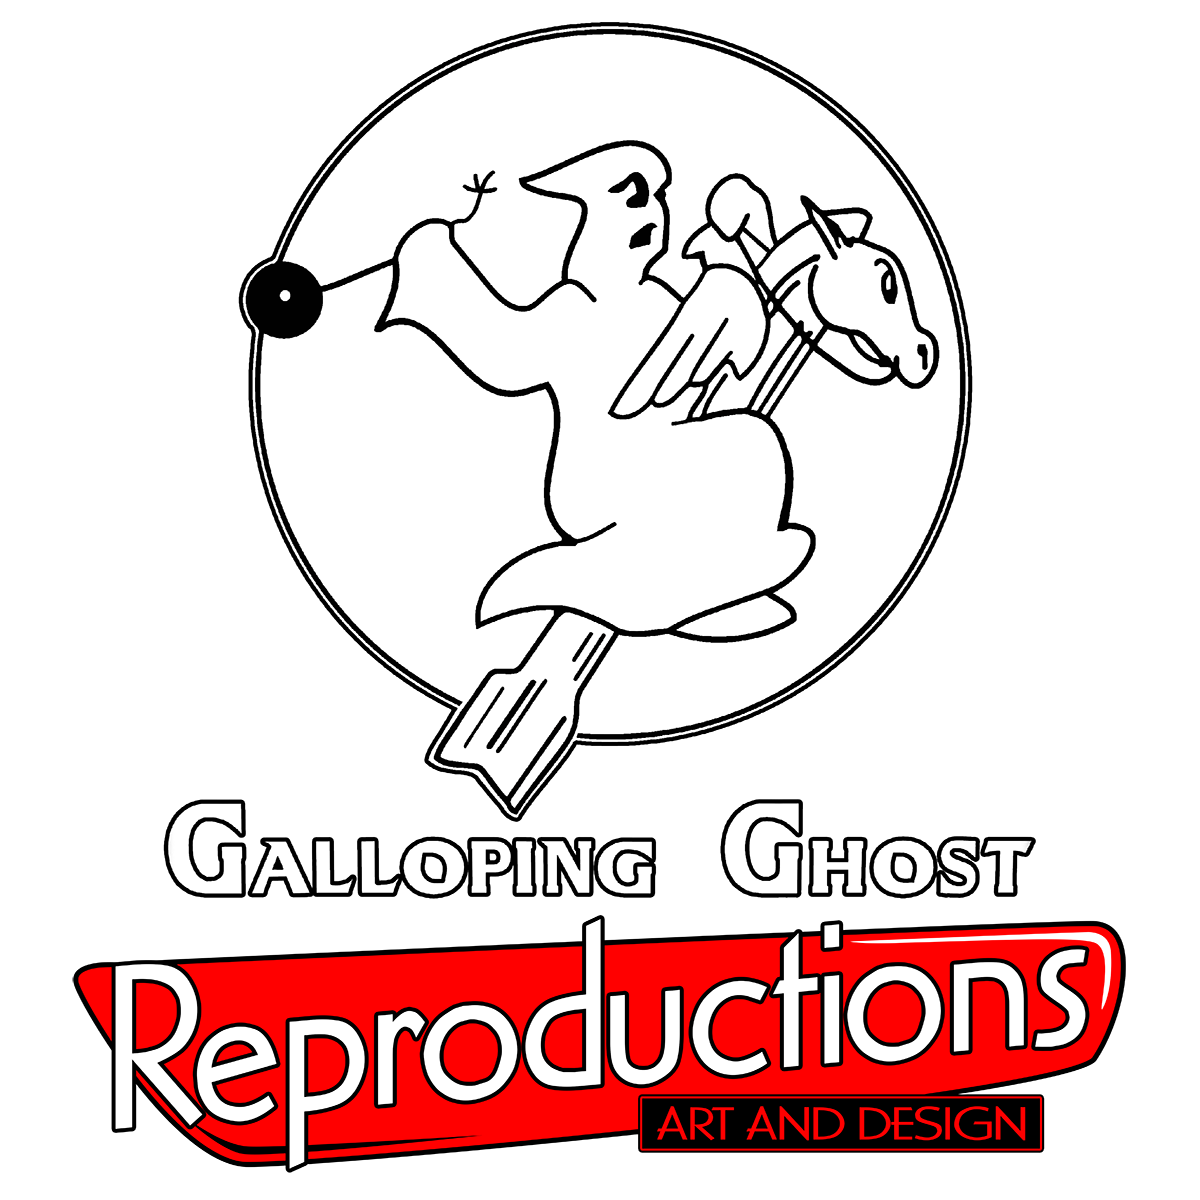 Galloping Ghost Reproductions